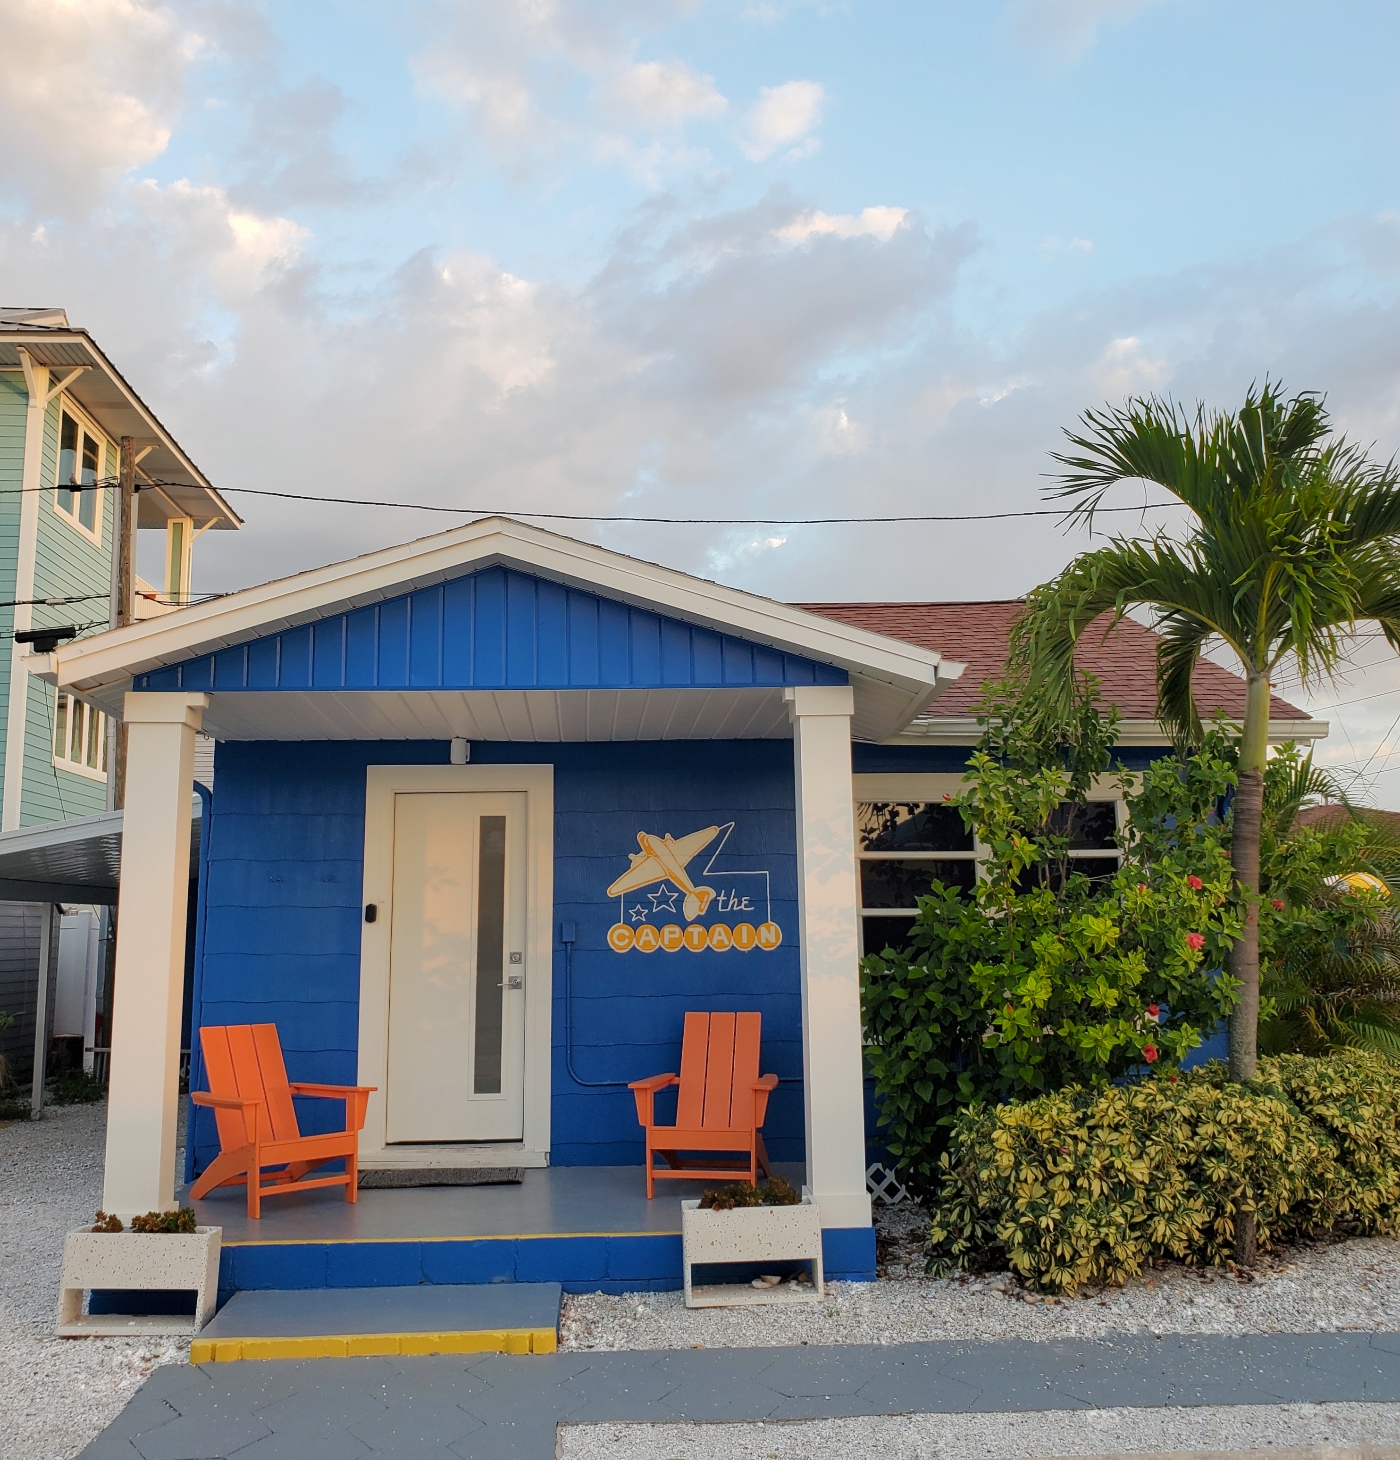 The Captain cottage at Sunset Inn Treasure Island Florida. The Captain was a former sergeant's quarters at McDill Airforce Base